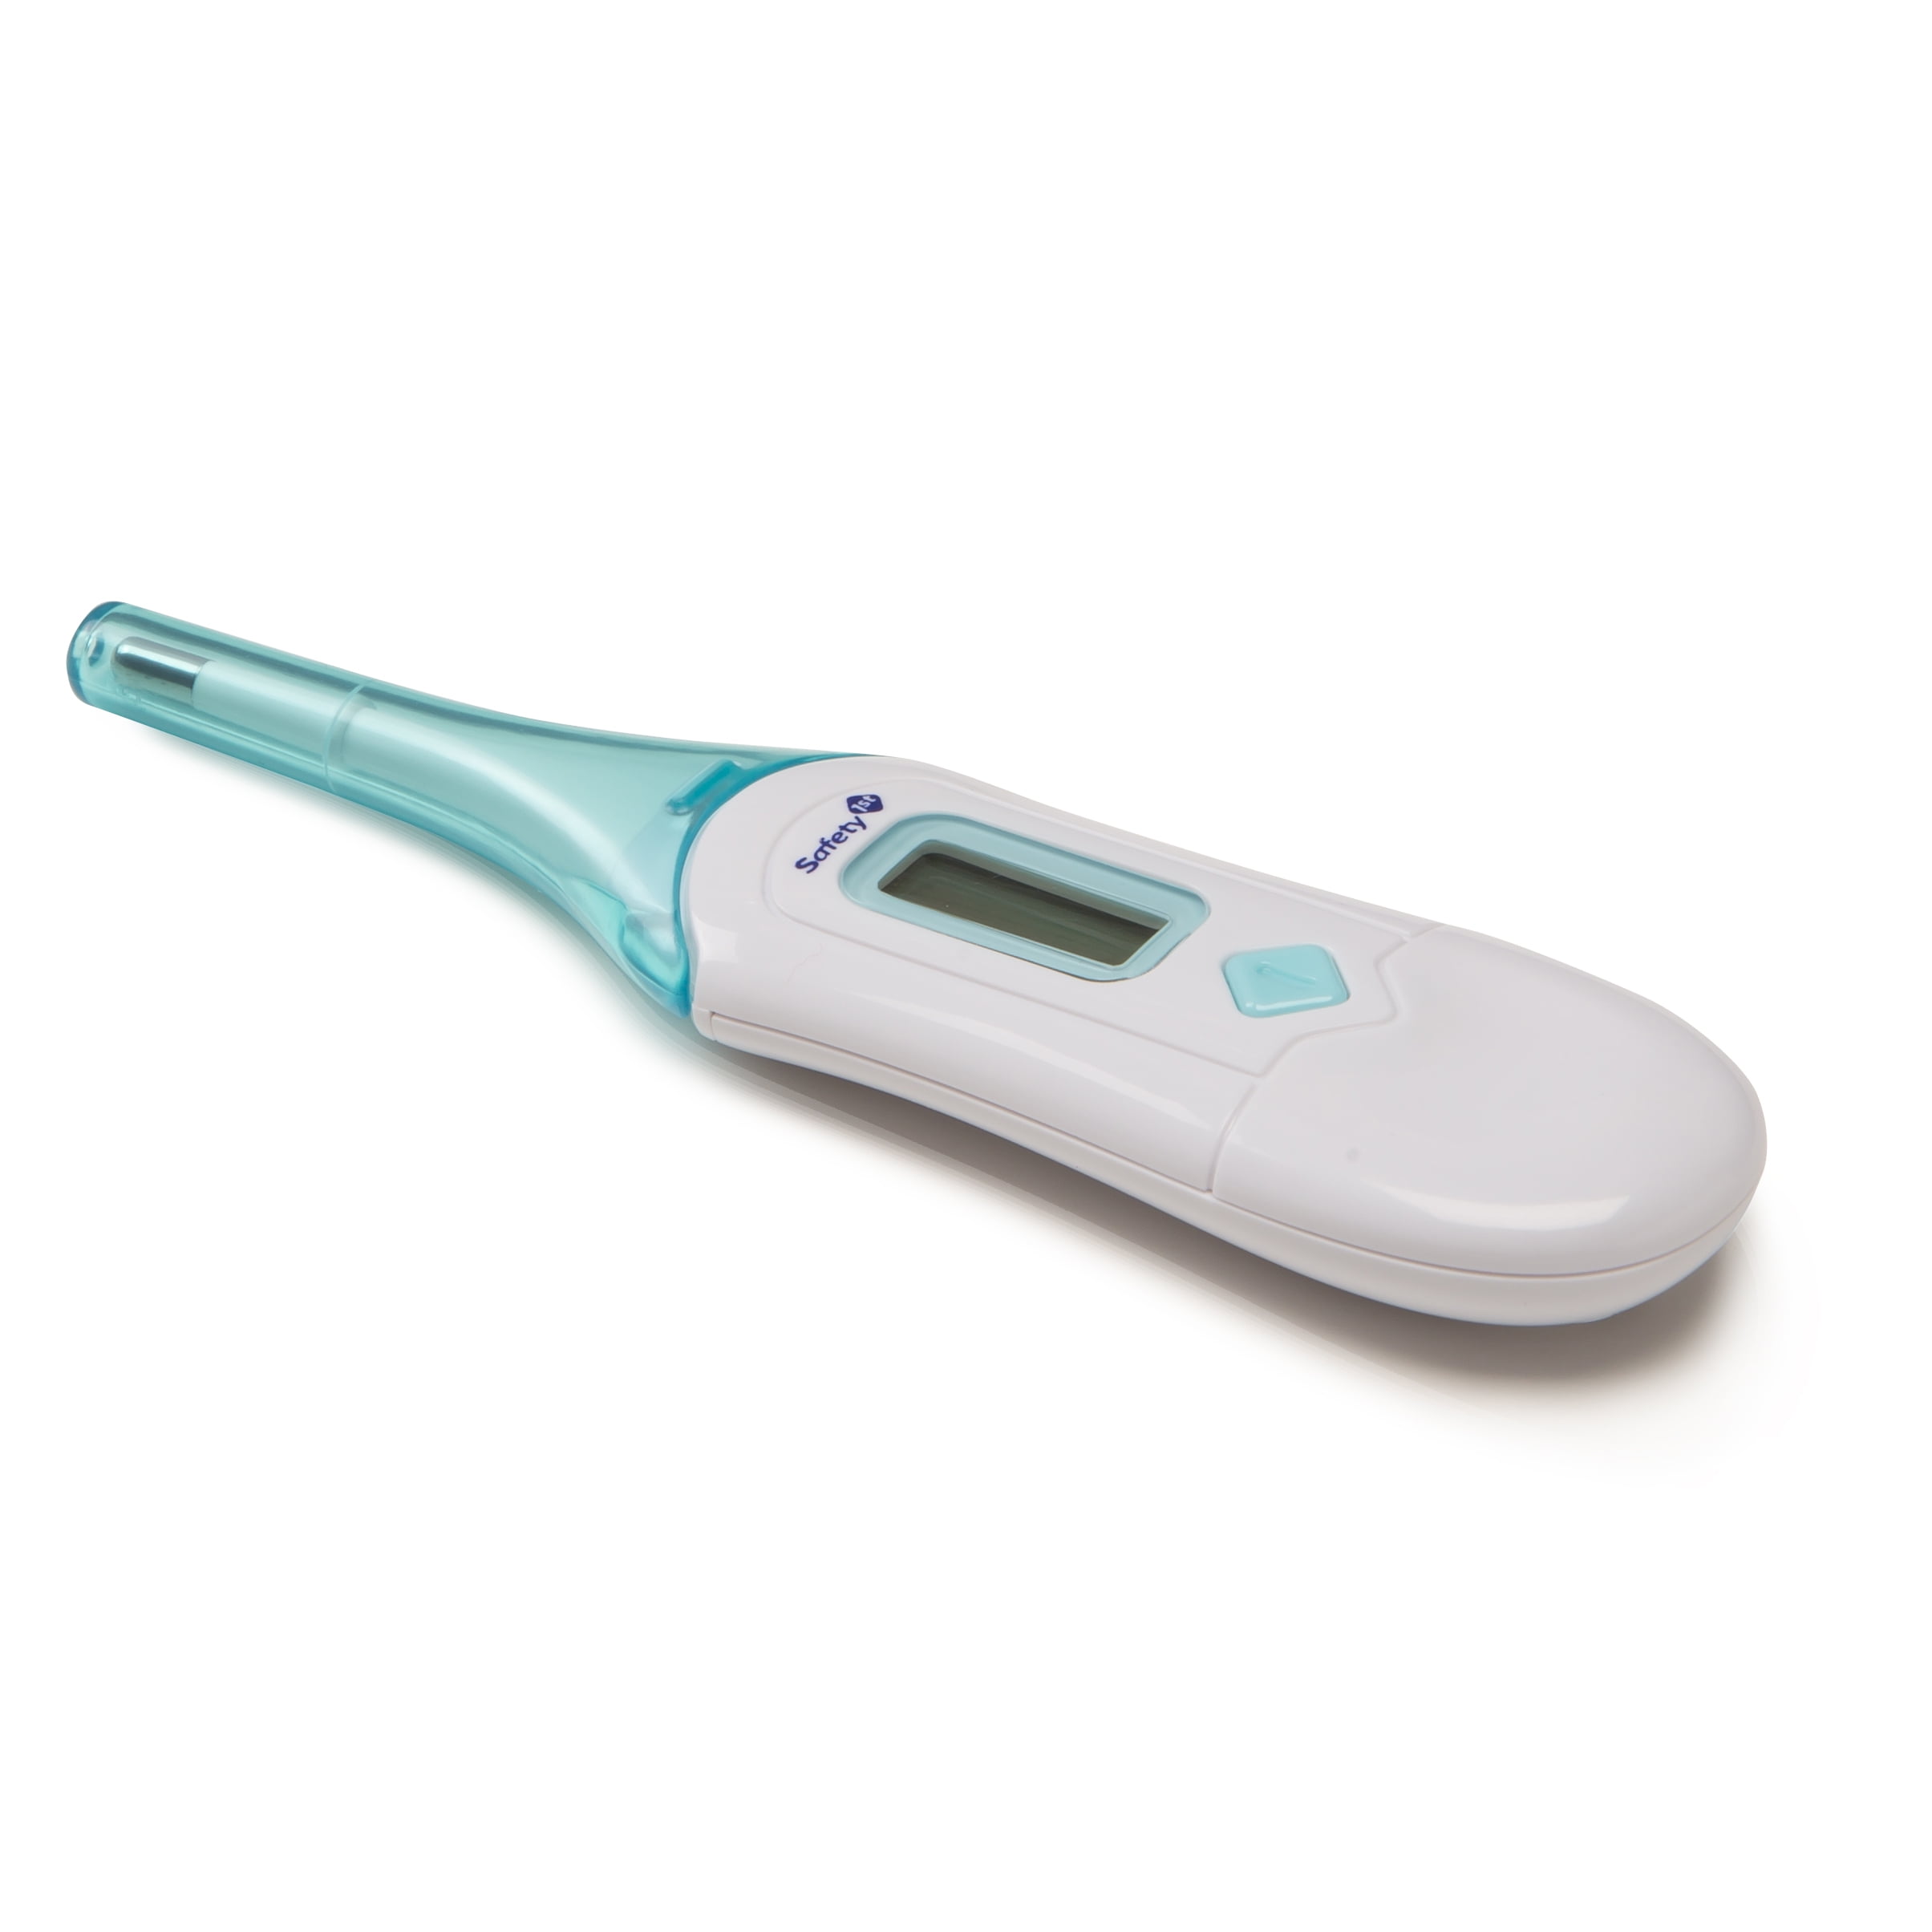 Safety 1st 3-in-1 Nursery Thermometer Underarm Oral Rectal 30 Second Reading